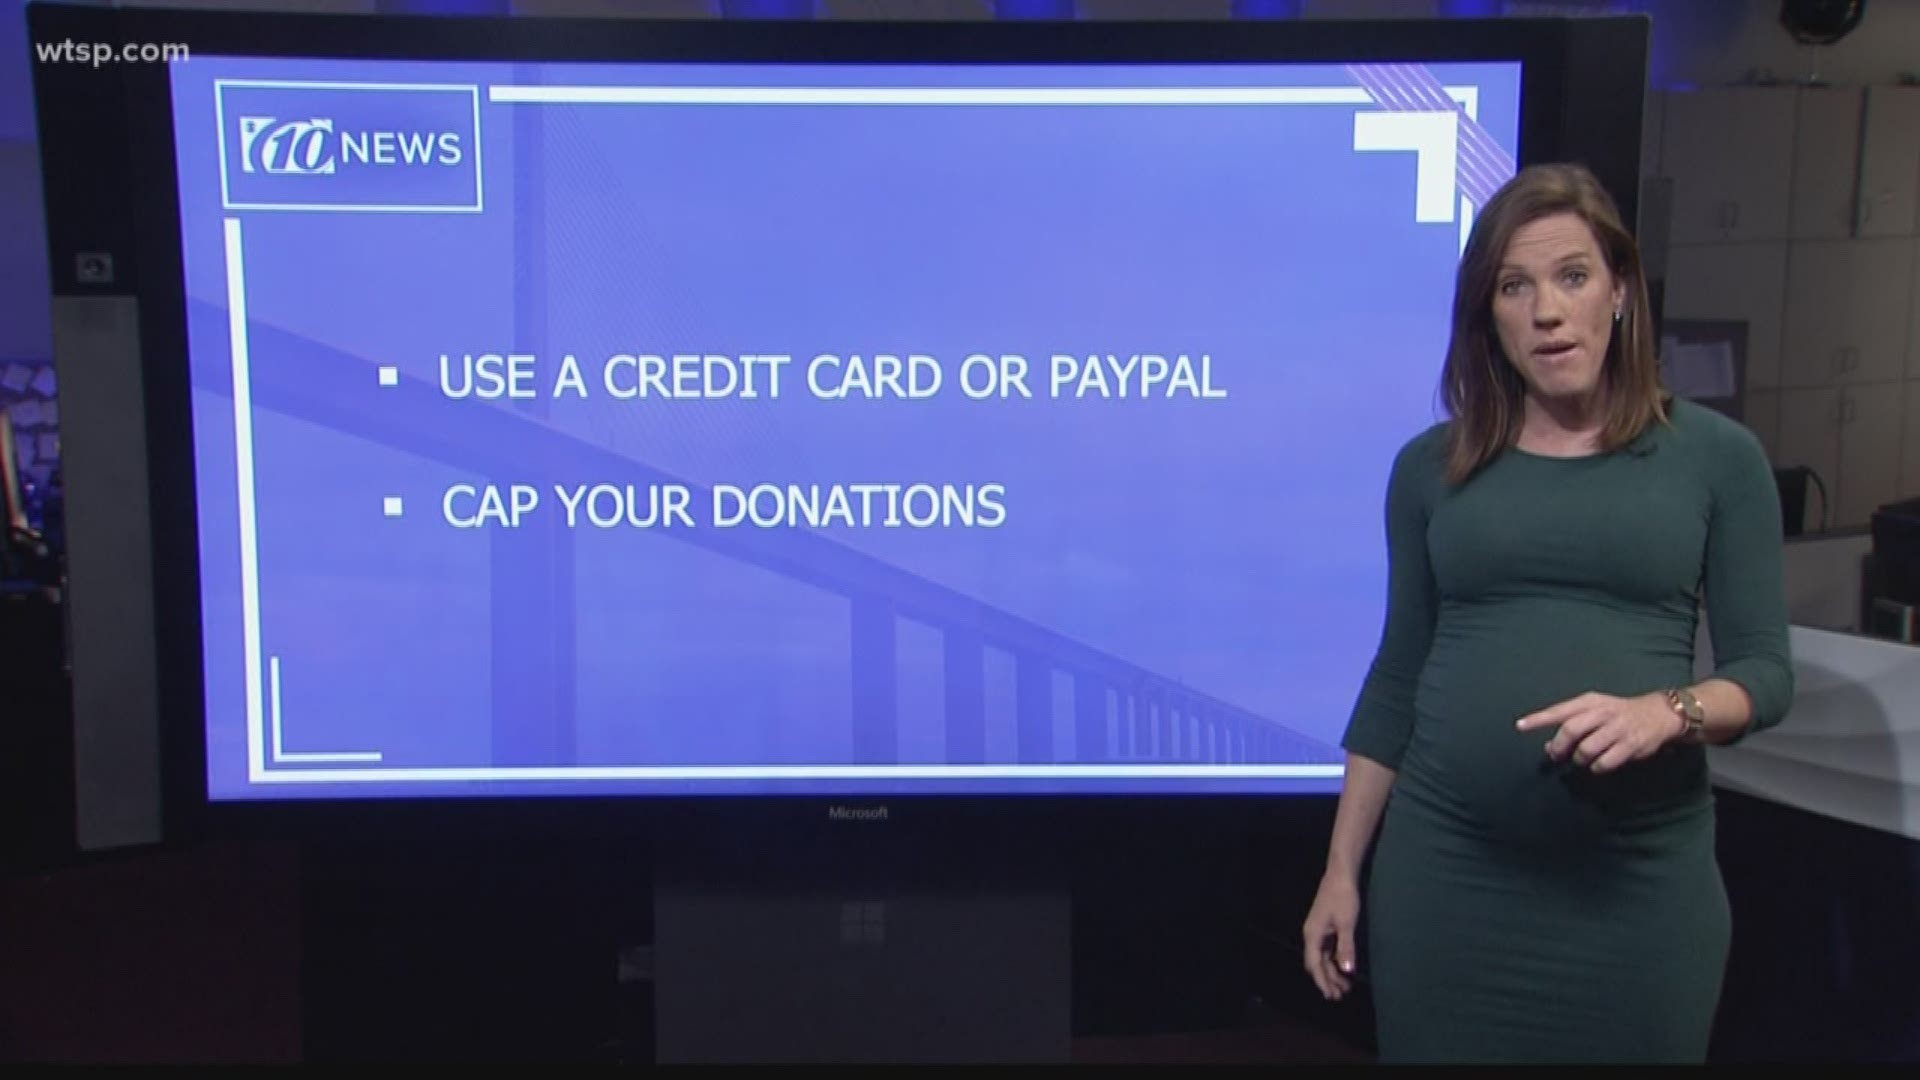 Sometimes the easiest way to help a community in pain is to make a donation online, but you need to be cautious when you're not directly donating to people you know personally.